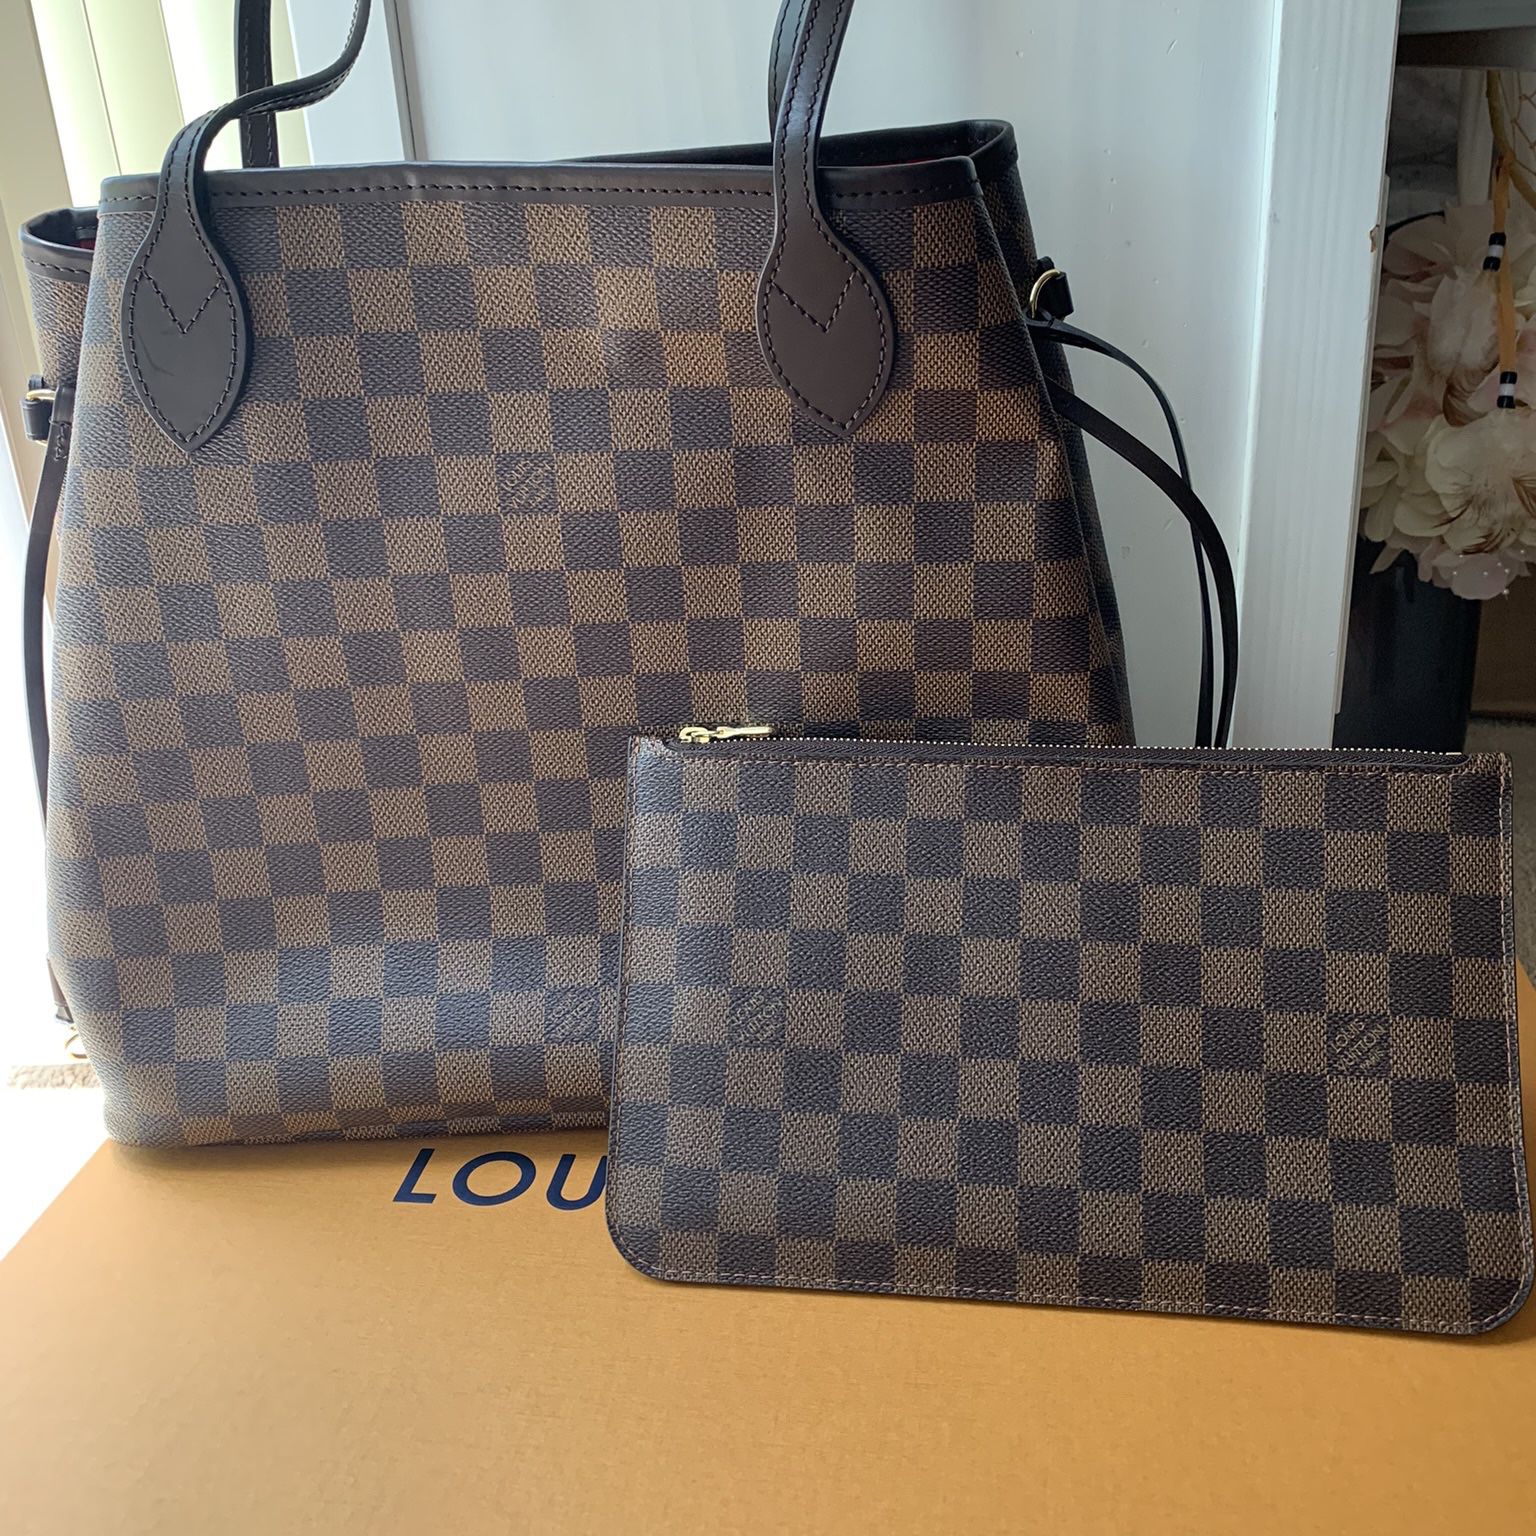 Louis Vuitton Bag And Matching Wallet for Sale in Clovis, CA - OfferUp